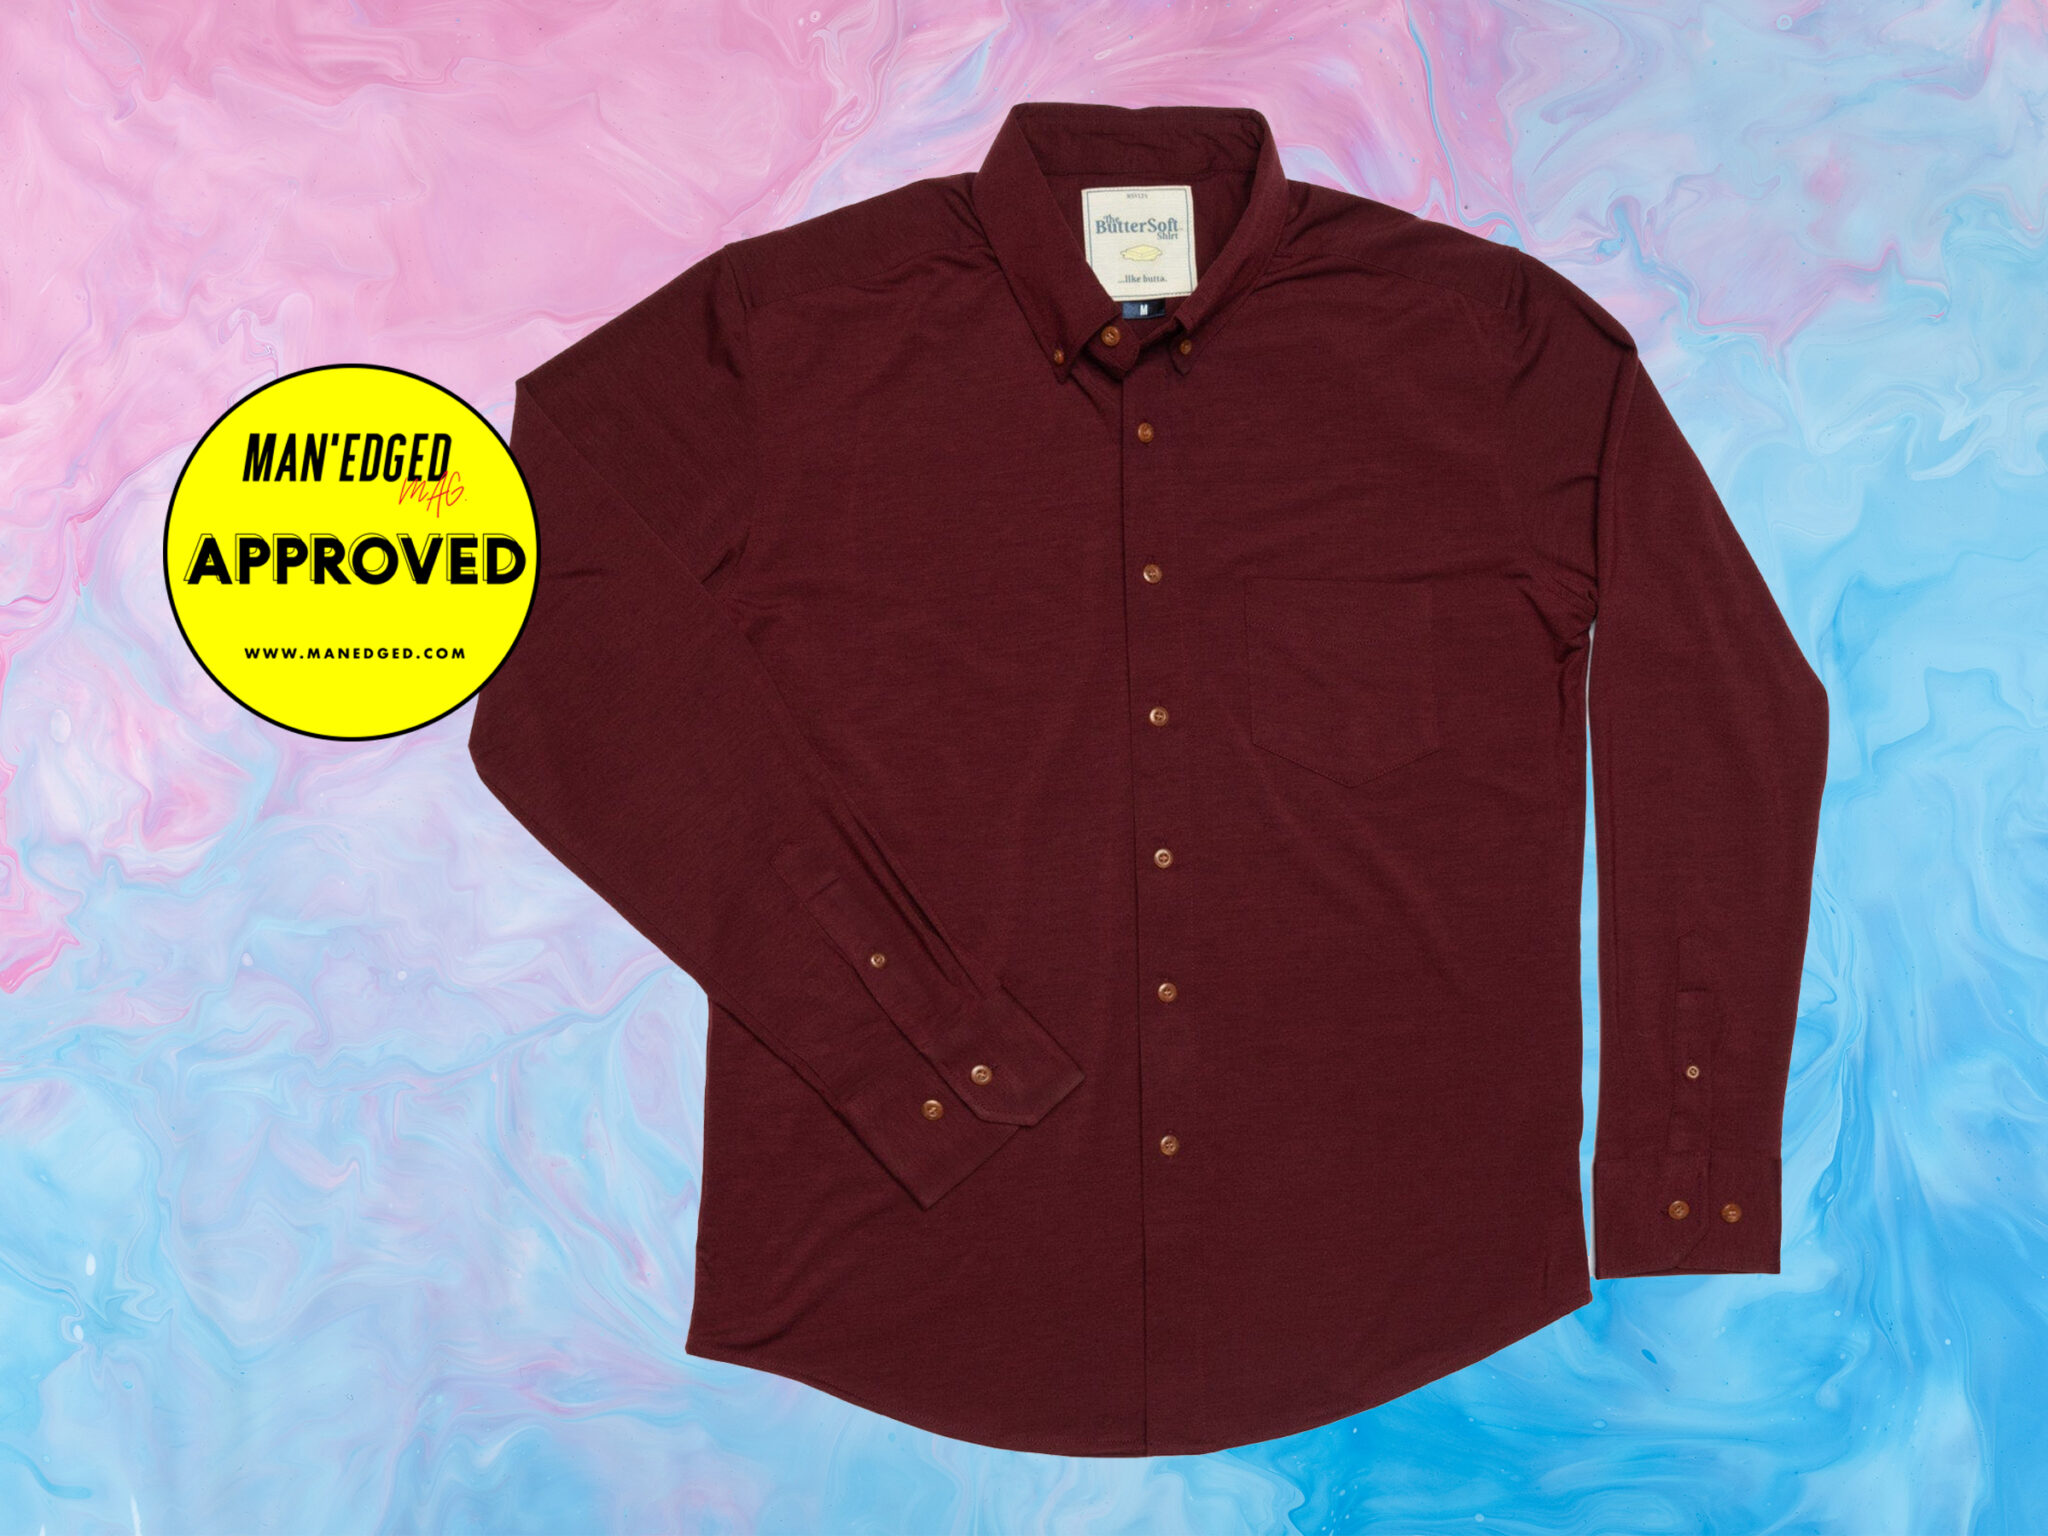 Non Cheesy Valentine's Day gifts for him RSVLTS ButterSoft Shirt for men